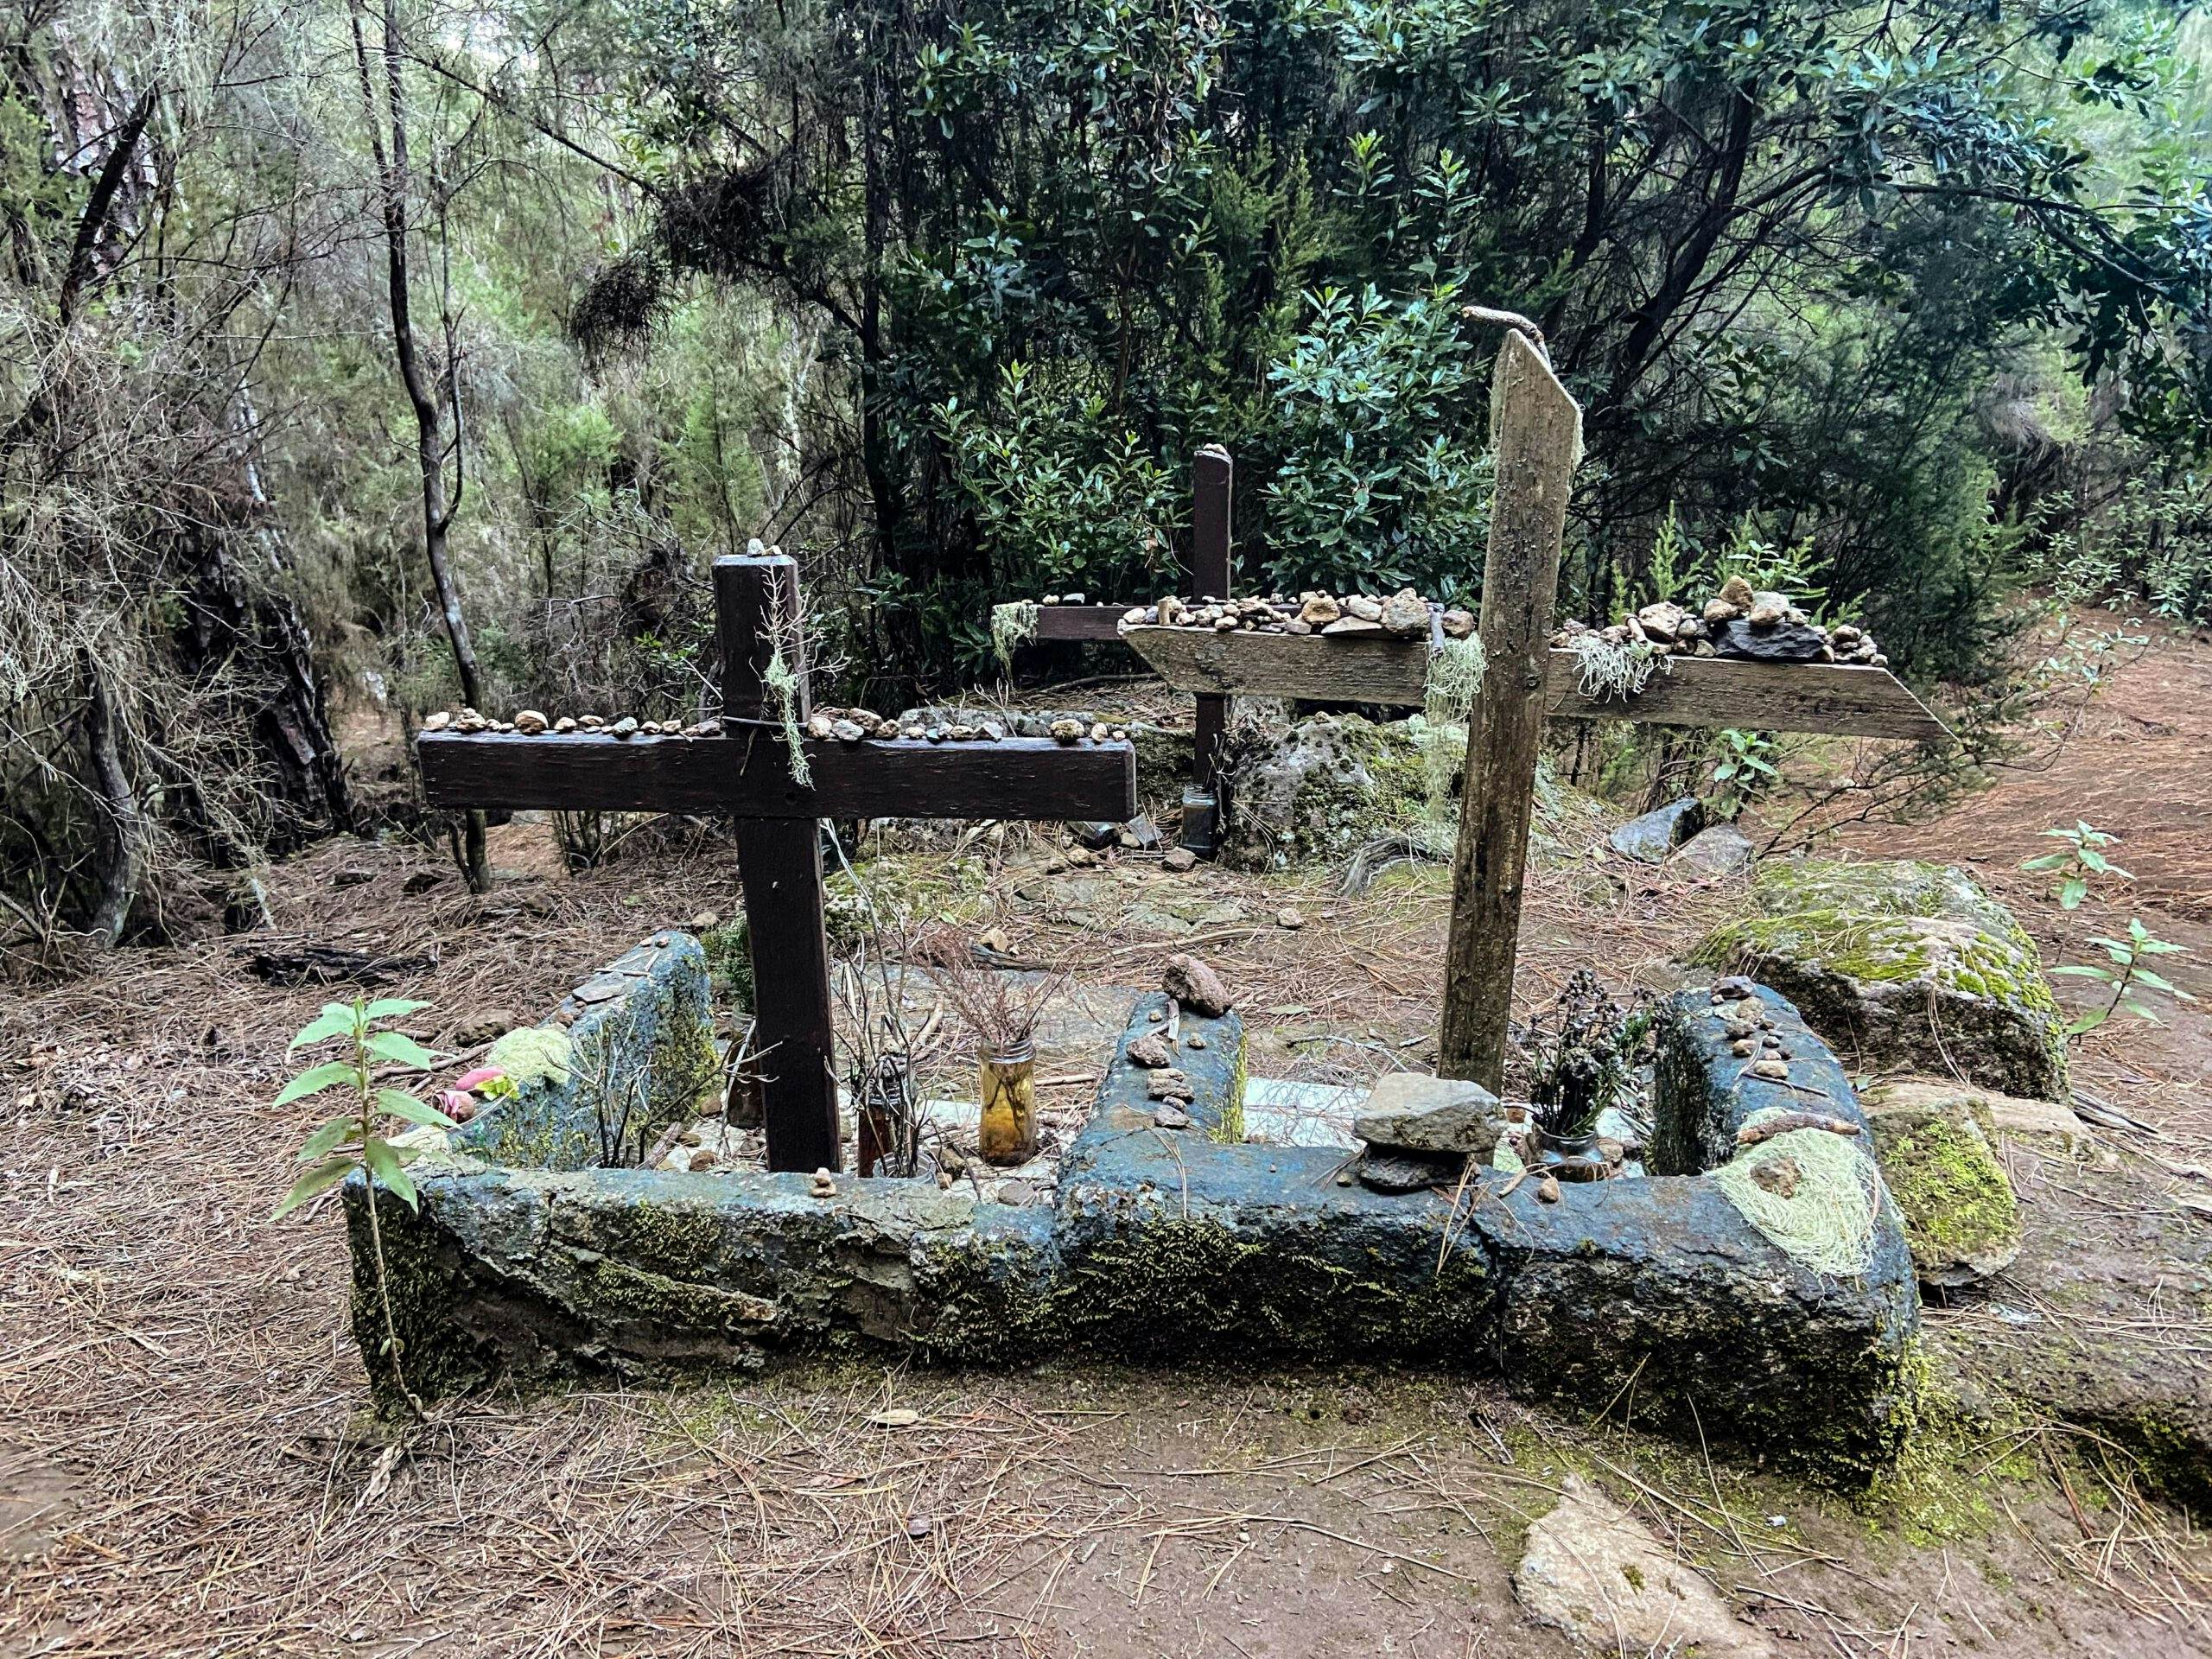 Crosses and memorials along the way on the pilgrimage trail